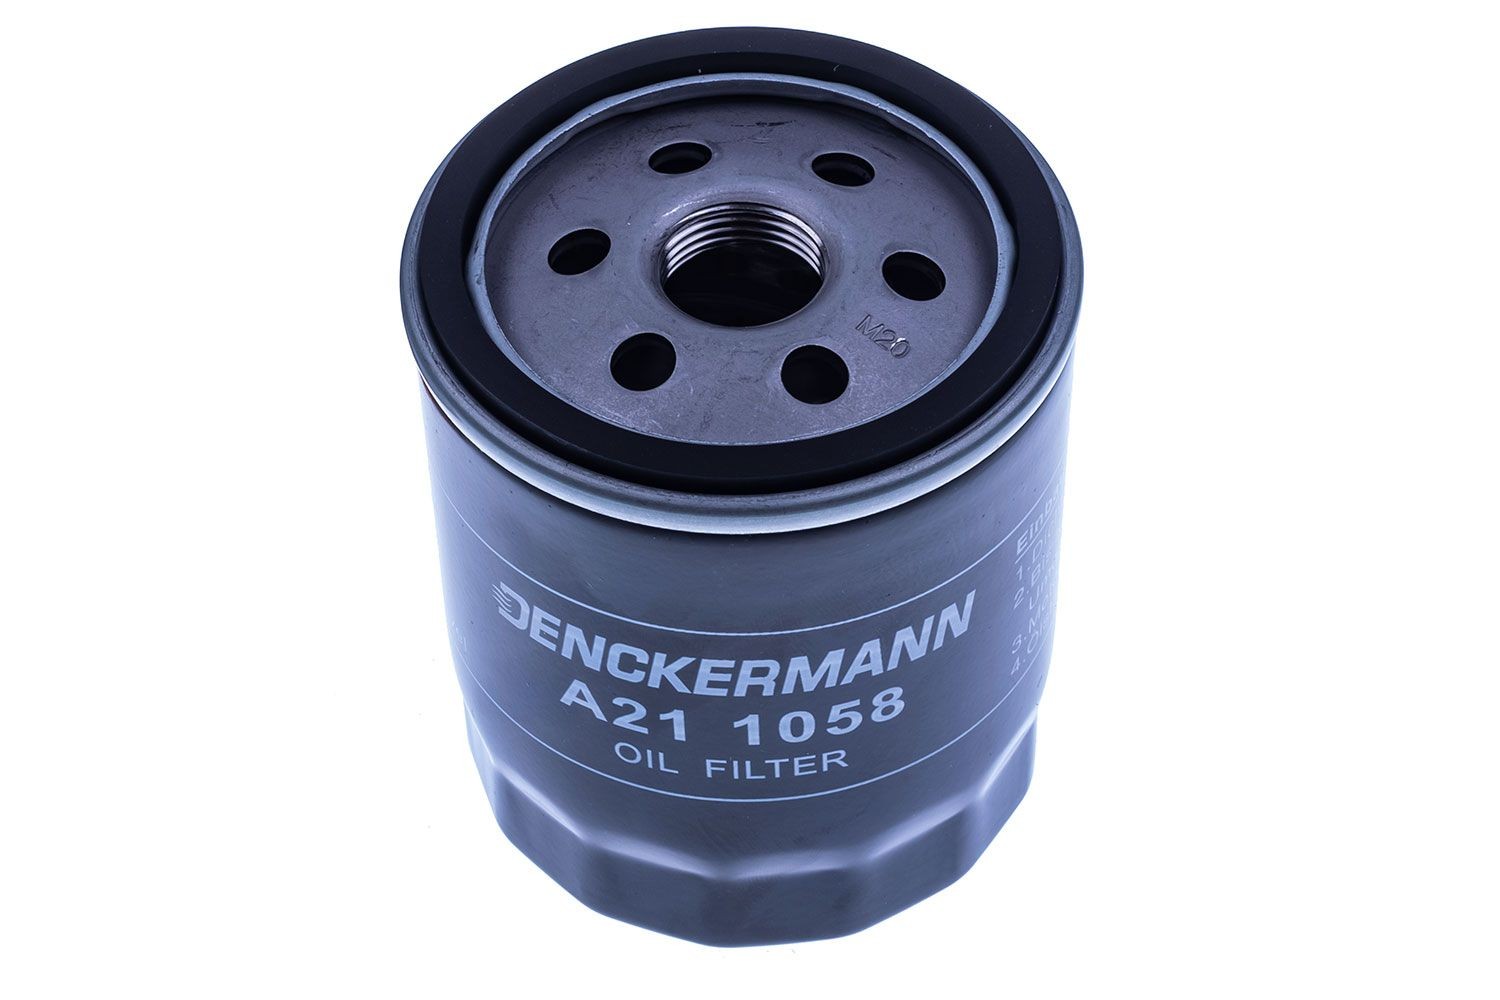 A211058 DENCKERMANN Oil filters PEUGEOT M 20 X 1.5, with one anti-return valve, Spin-on Filter